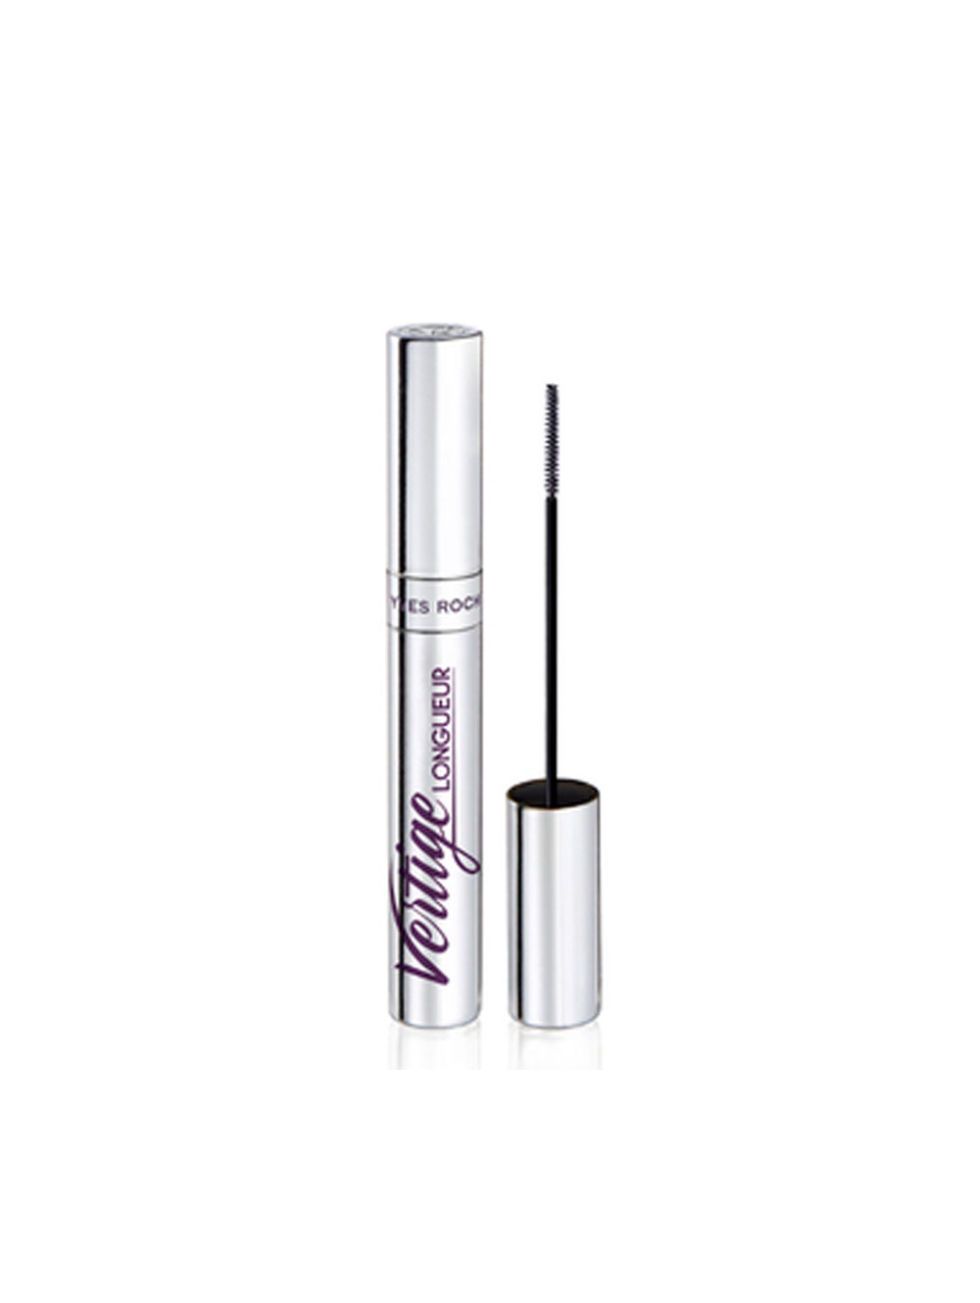 Cosmetics, Magenta, Violet, Tints and shades, Cylinder, Silver, Lipstick, Battery, 